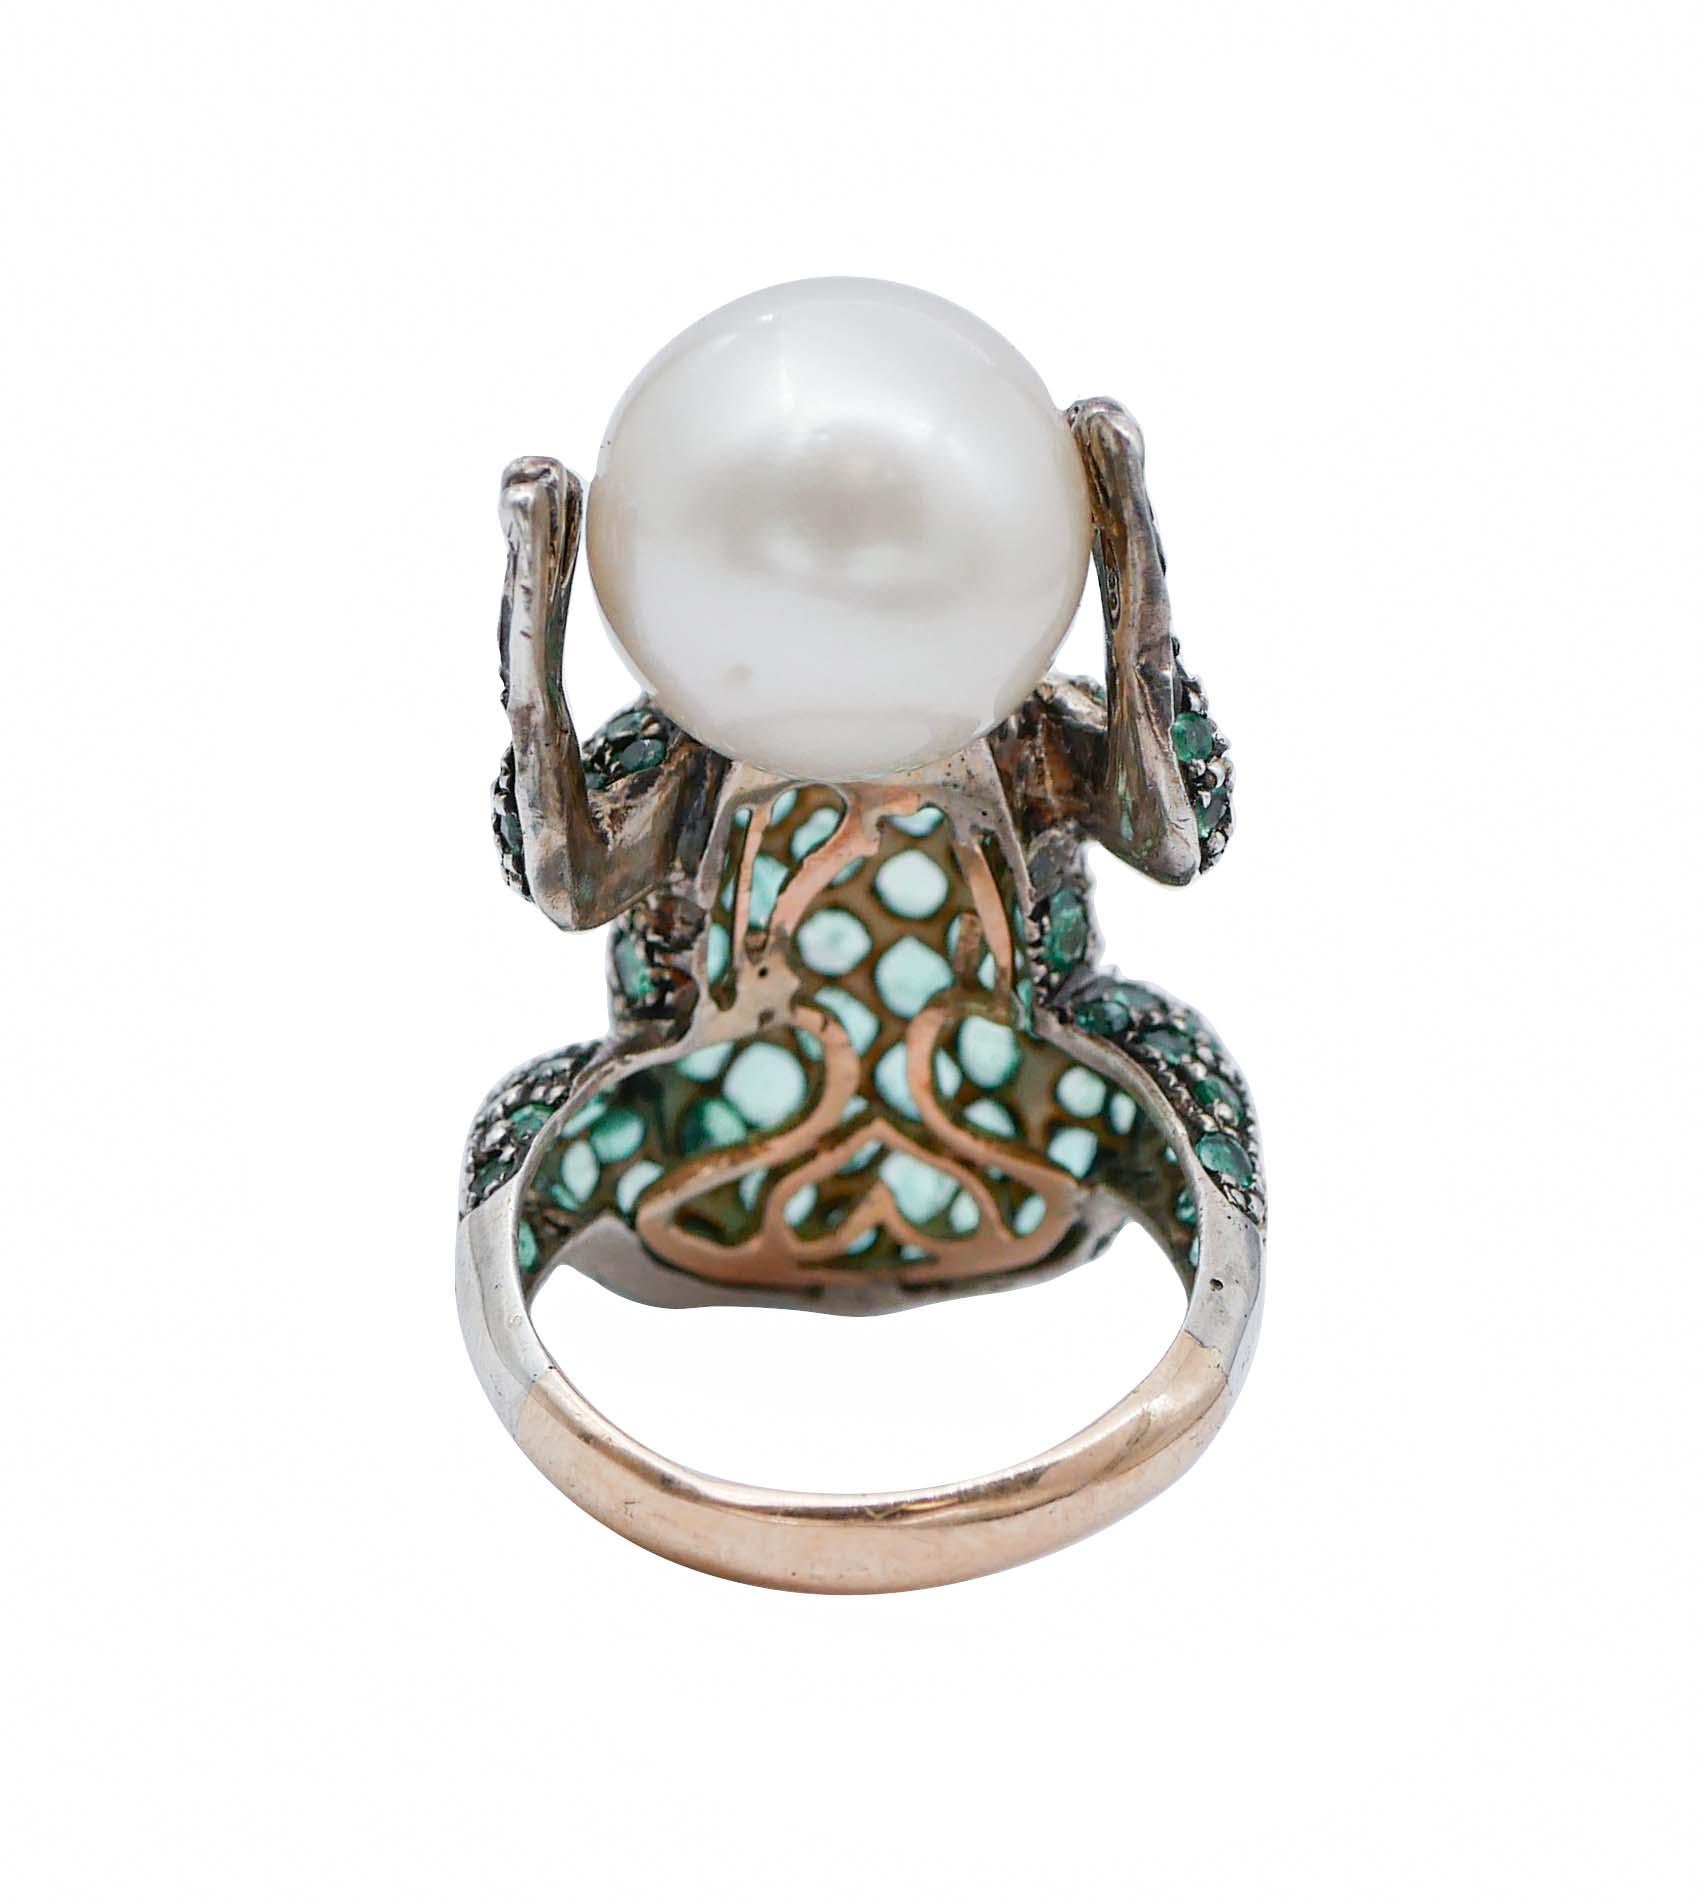 Mixed Cut Emeralds, Yellow Sapphires, Pearl, Rose Gold and Silver Frog Shape Ring